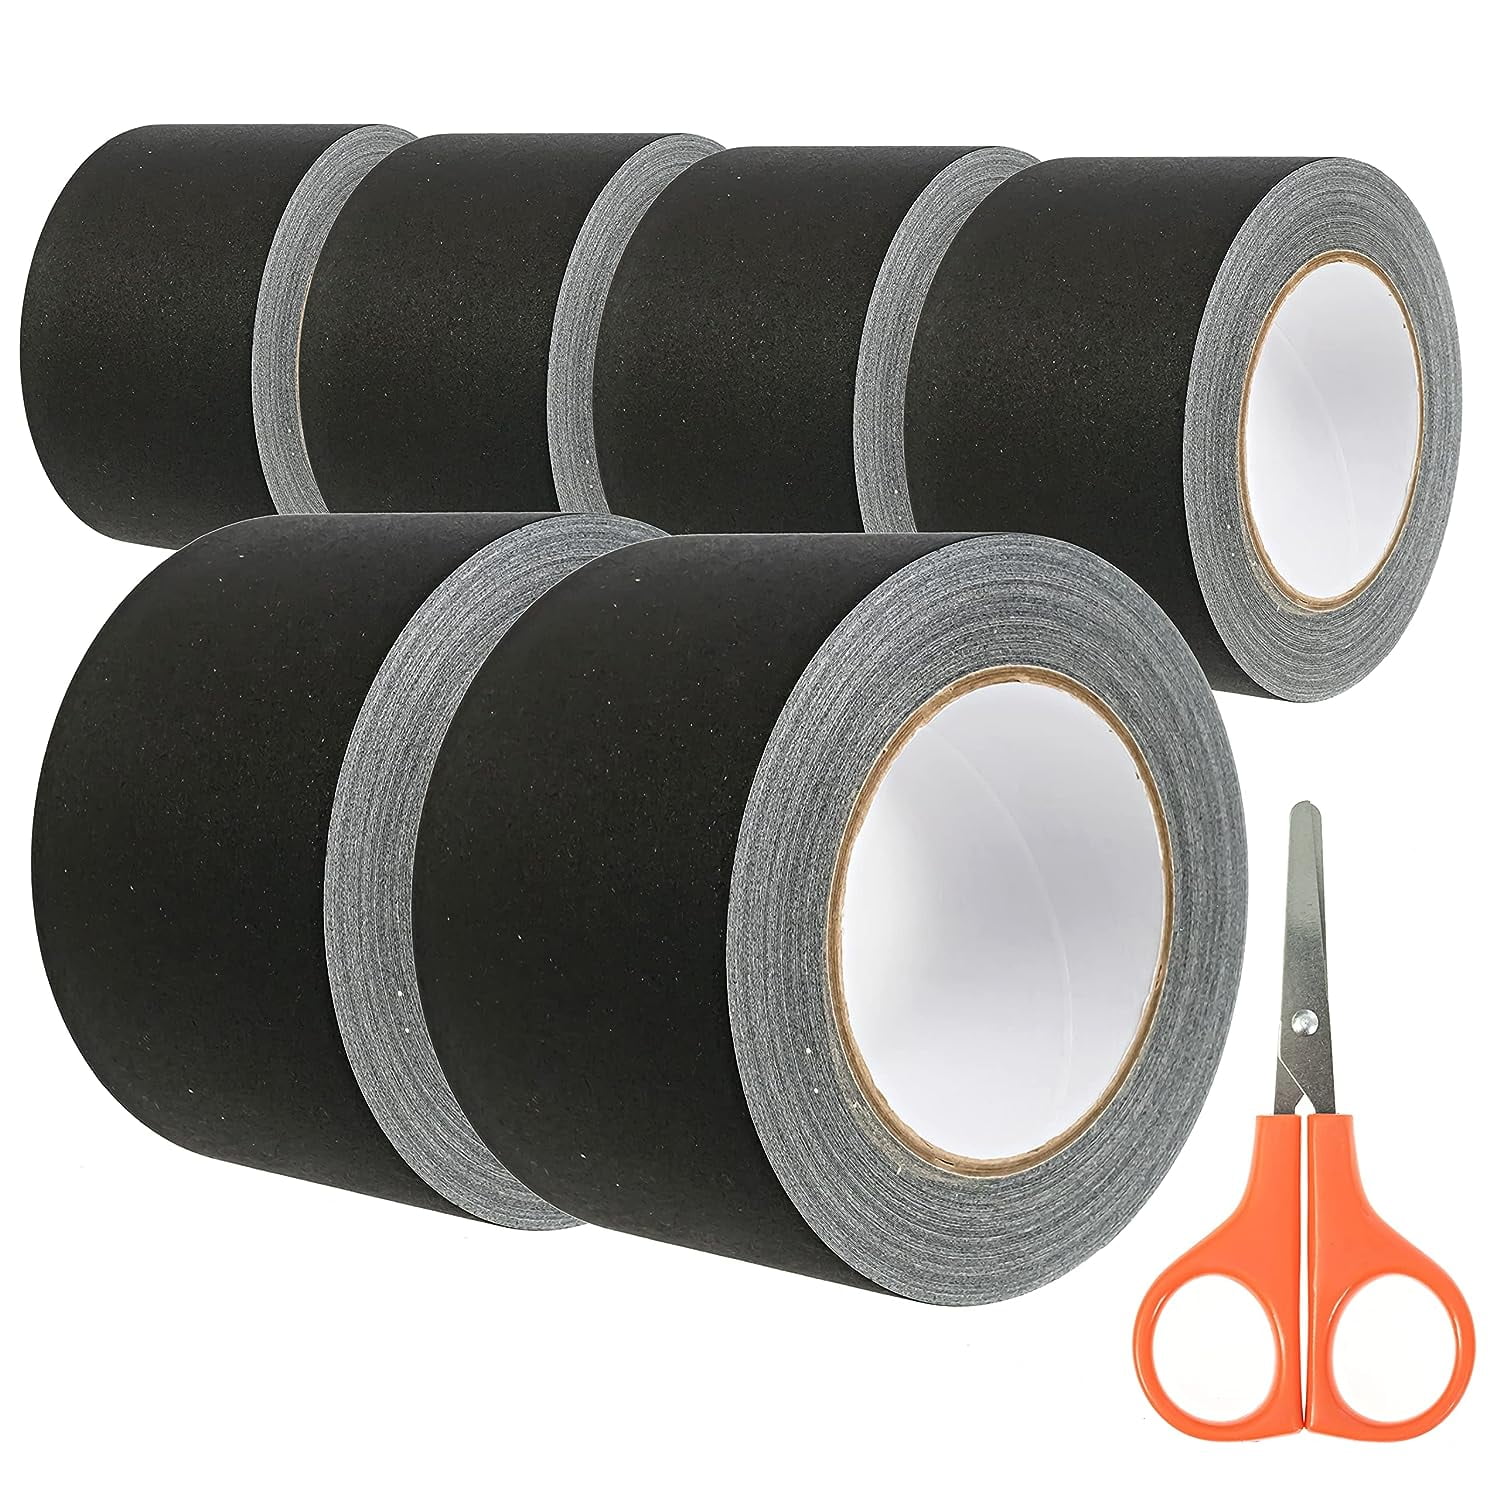 T.R.U. CGT-80 Black Gaffers Stage Tape with Rubber Adhesive, 2 in. wide x  60 Yards length, 12MIL Thickness (Pack of 1)